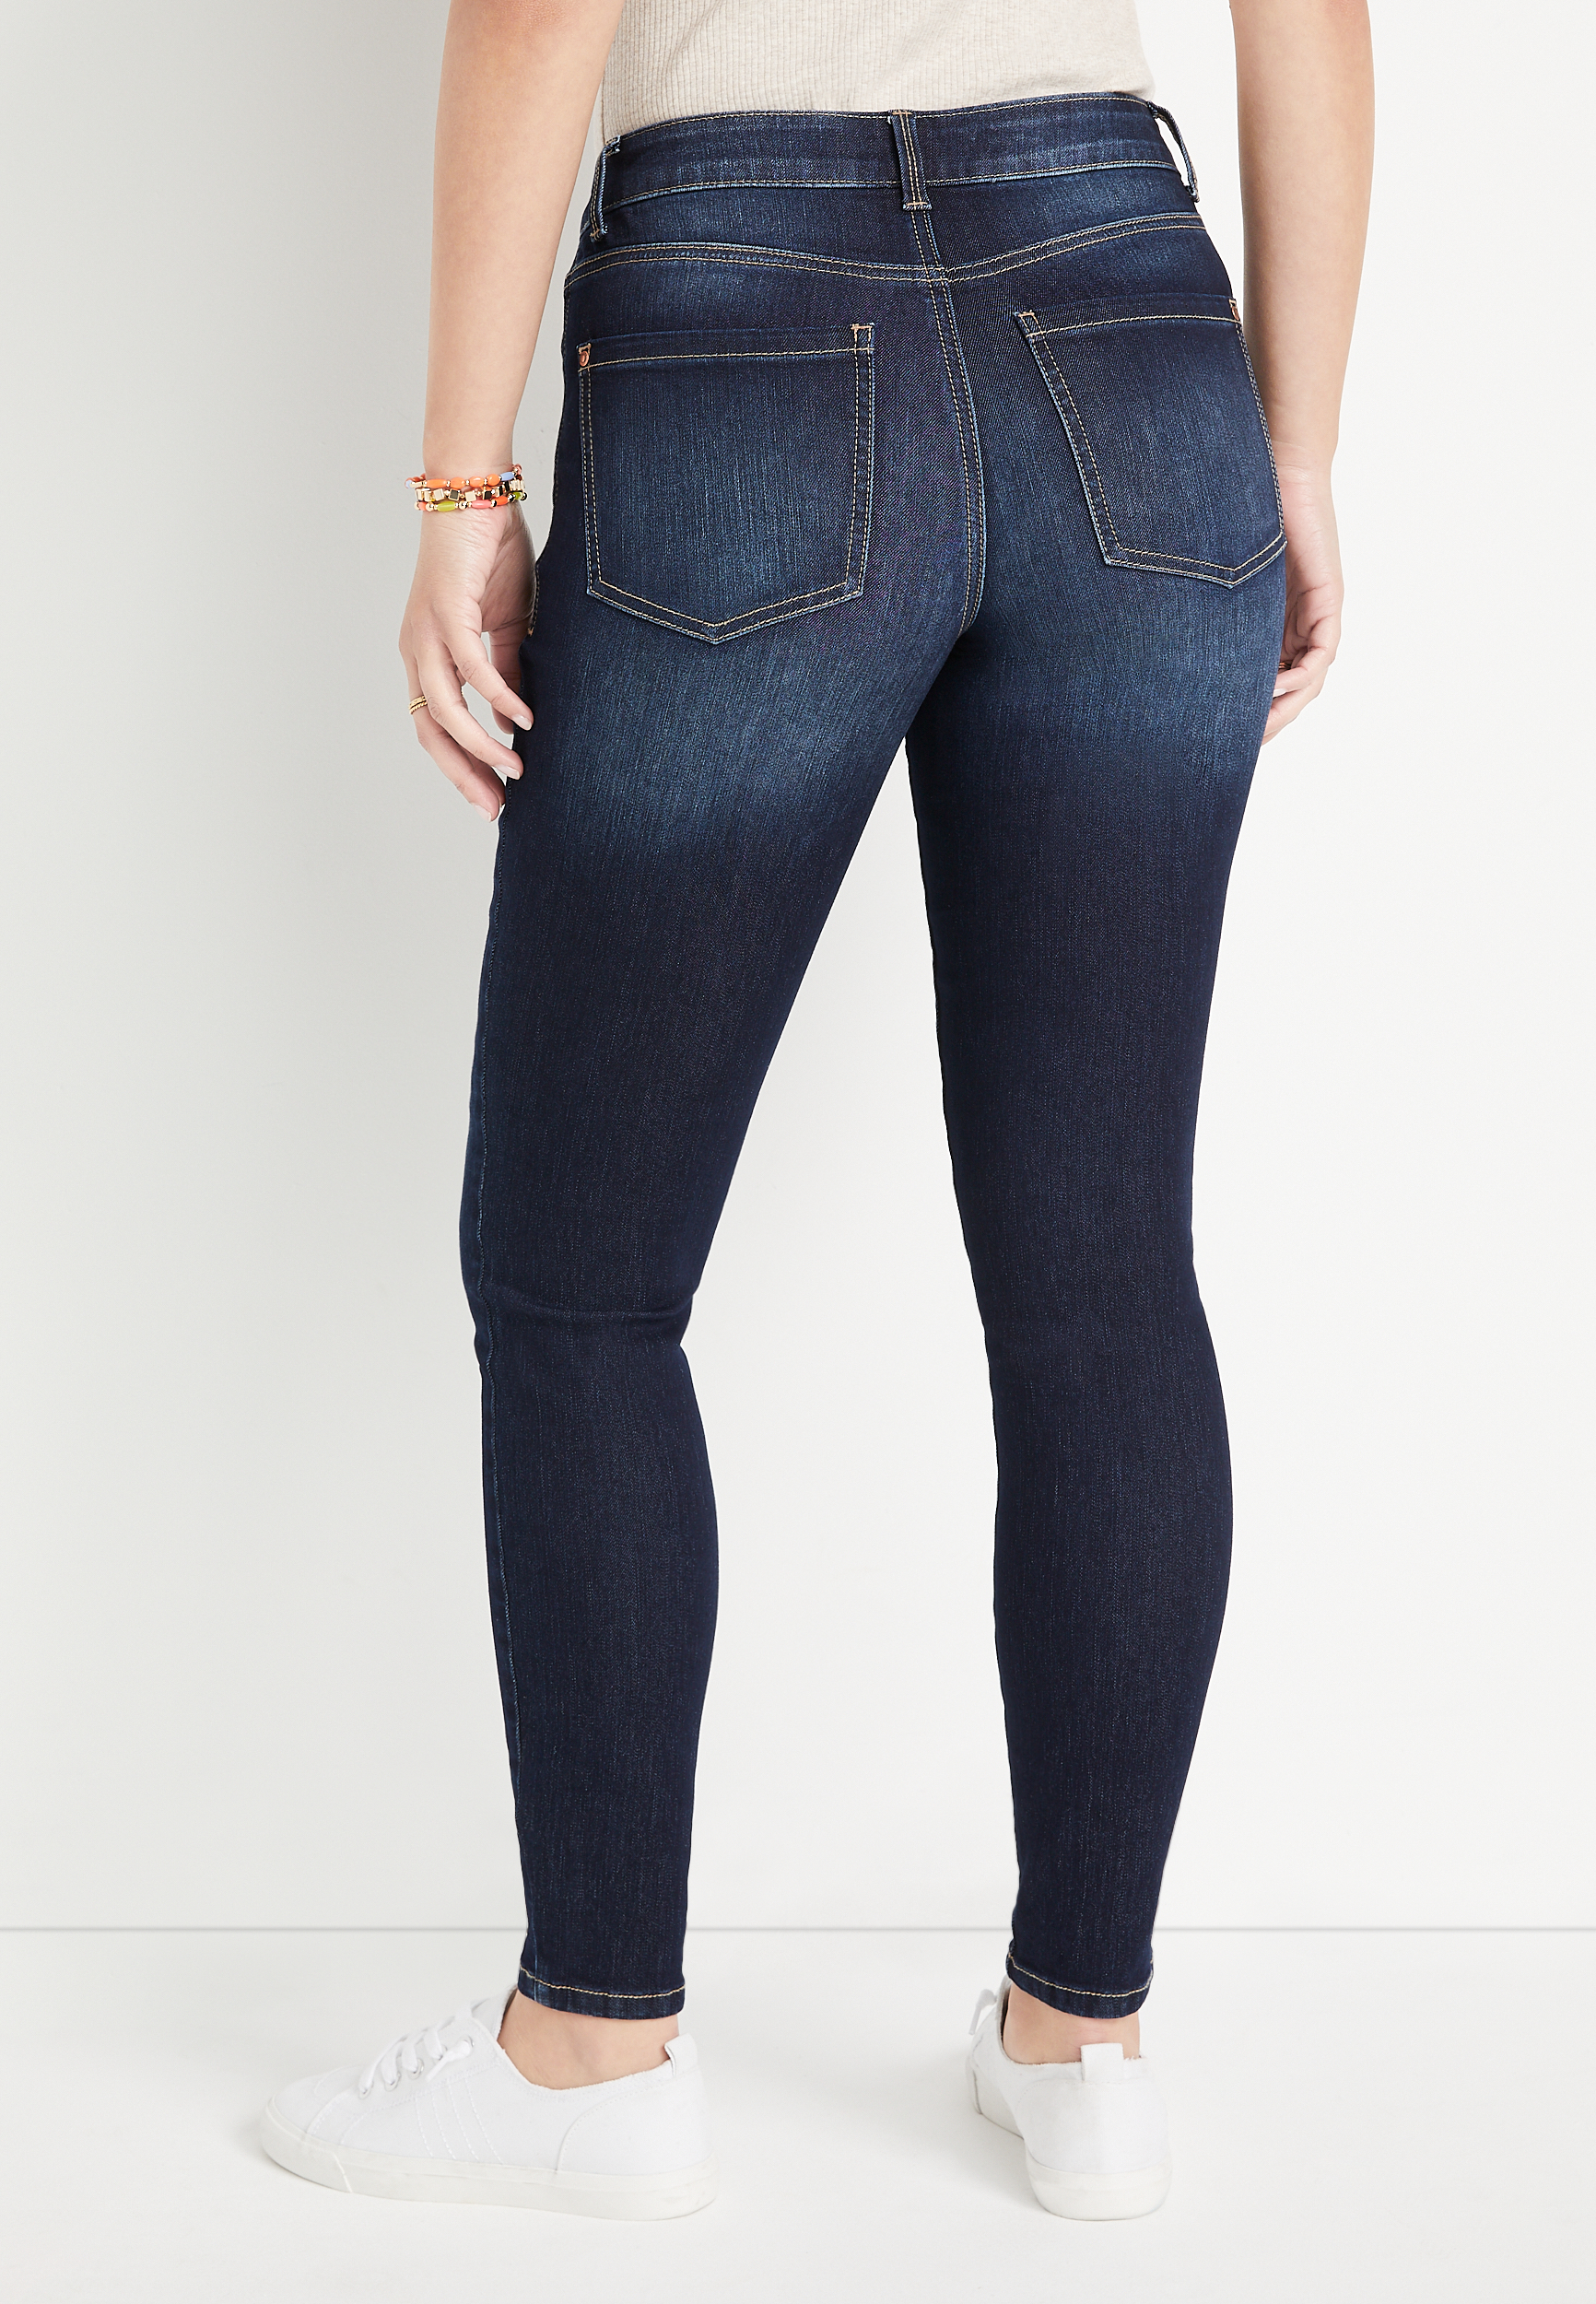 Bonito Nylon Cabra m jeans by maurices™ Everflex™ Super Skinny High Rise Stretch Jean |  maurices